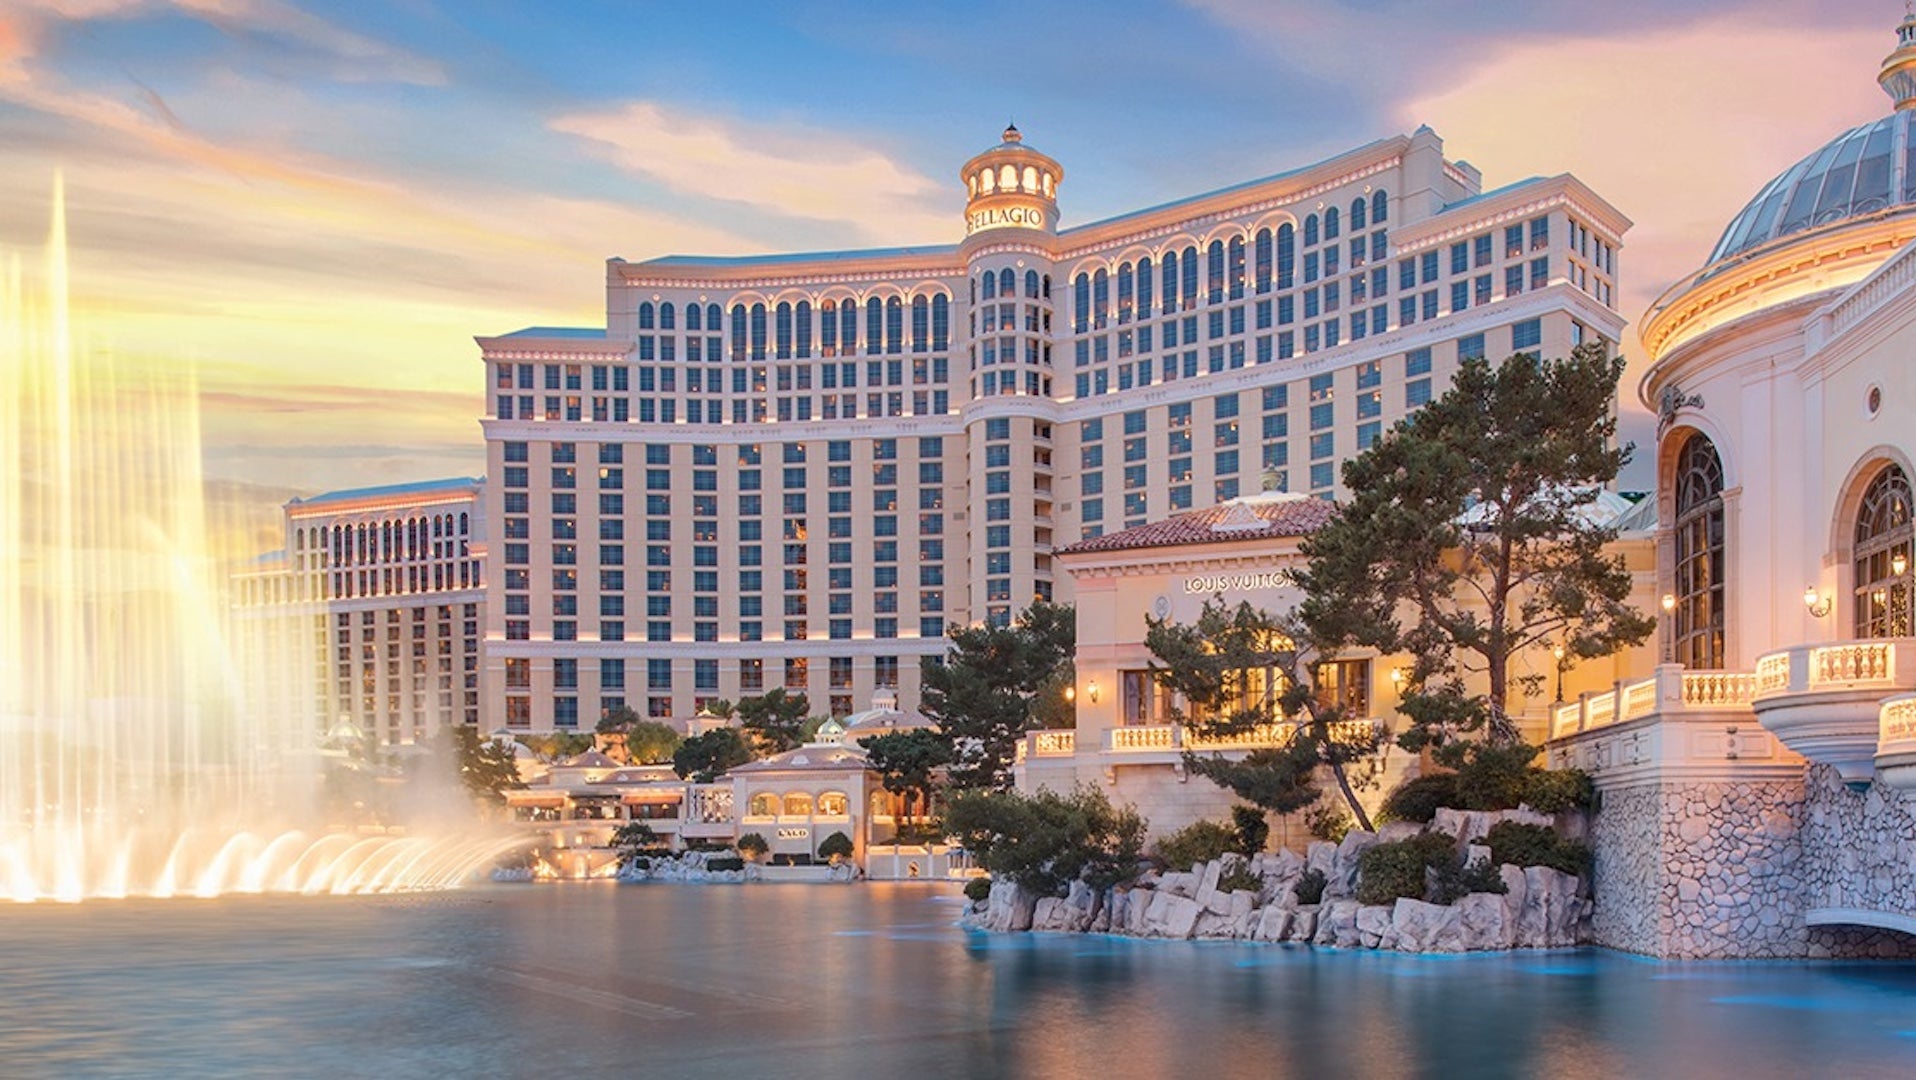 Wide shot at dusk of the bellagio hotel with the fountains in the front